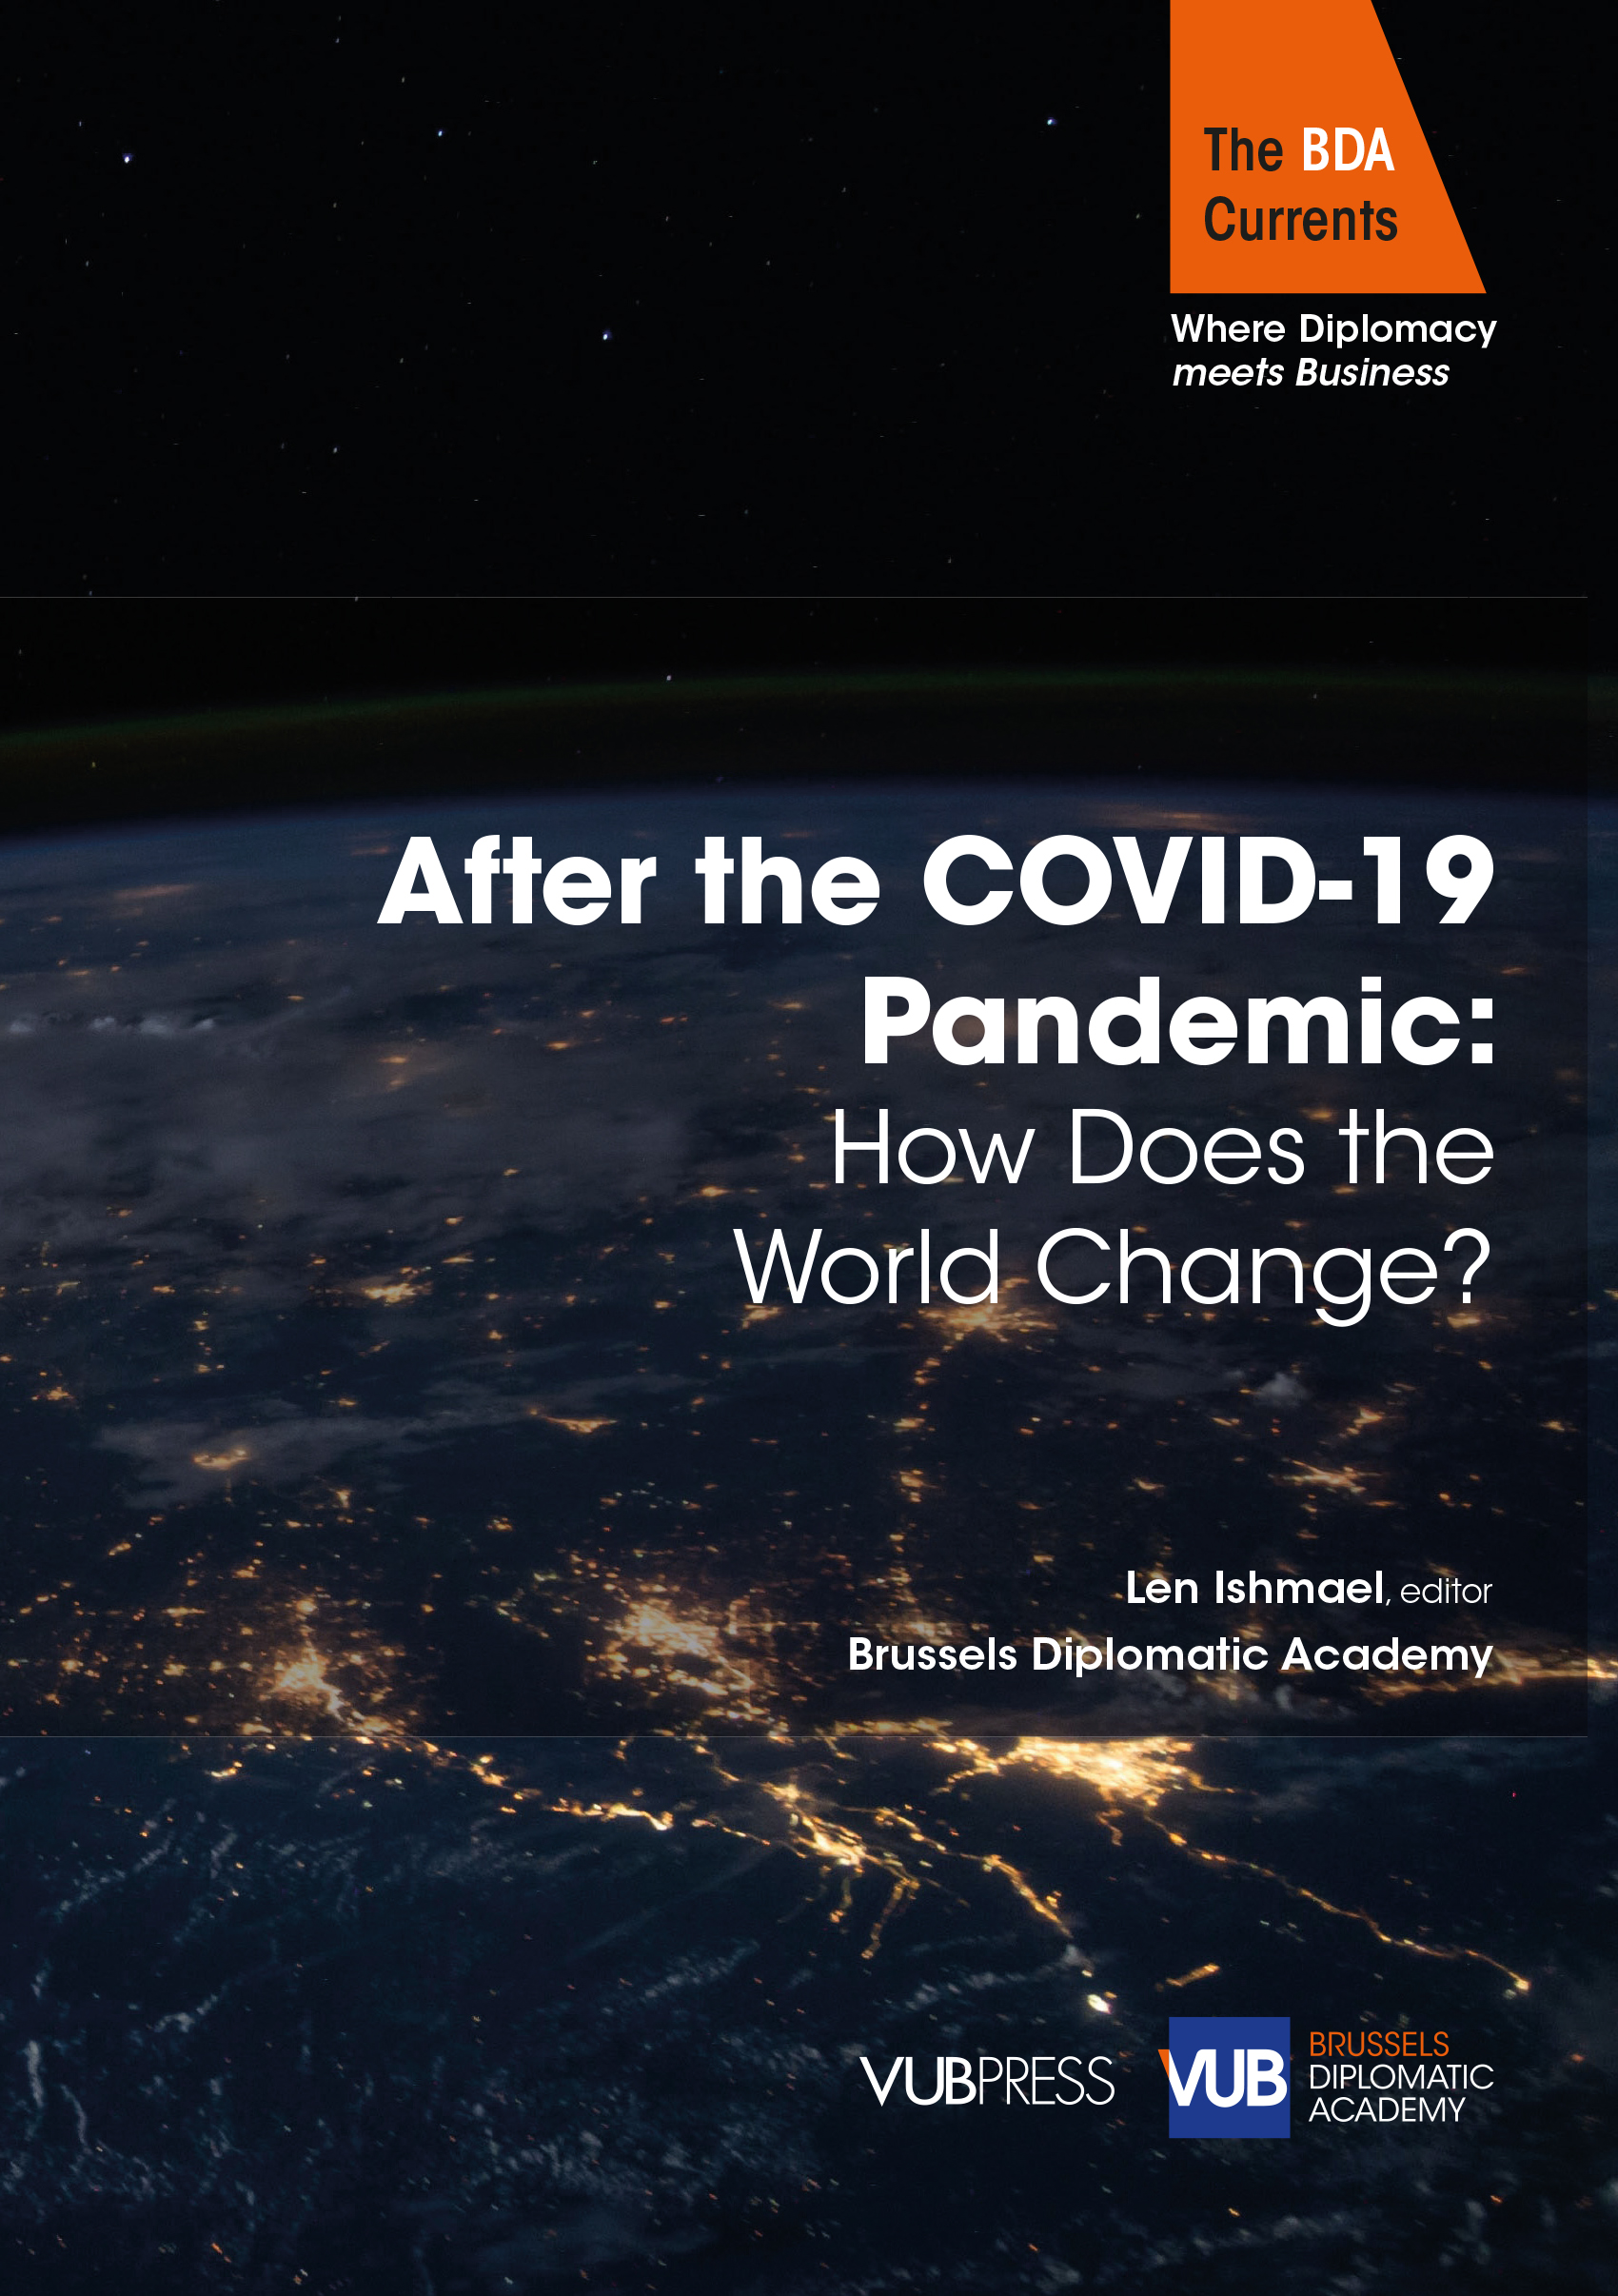 AFTER THE COVID-19 PANDEMIC: HOW DOES THE WORLD CHANGE?